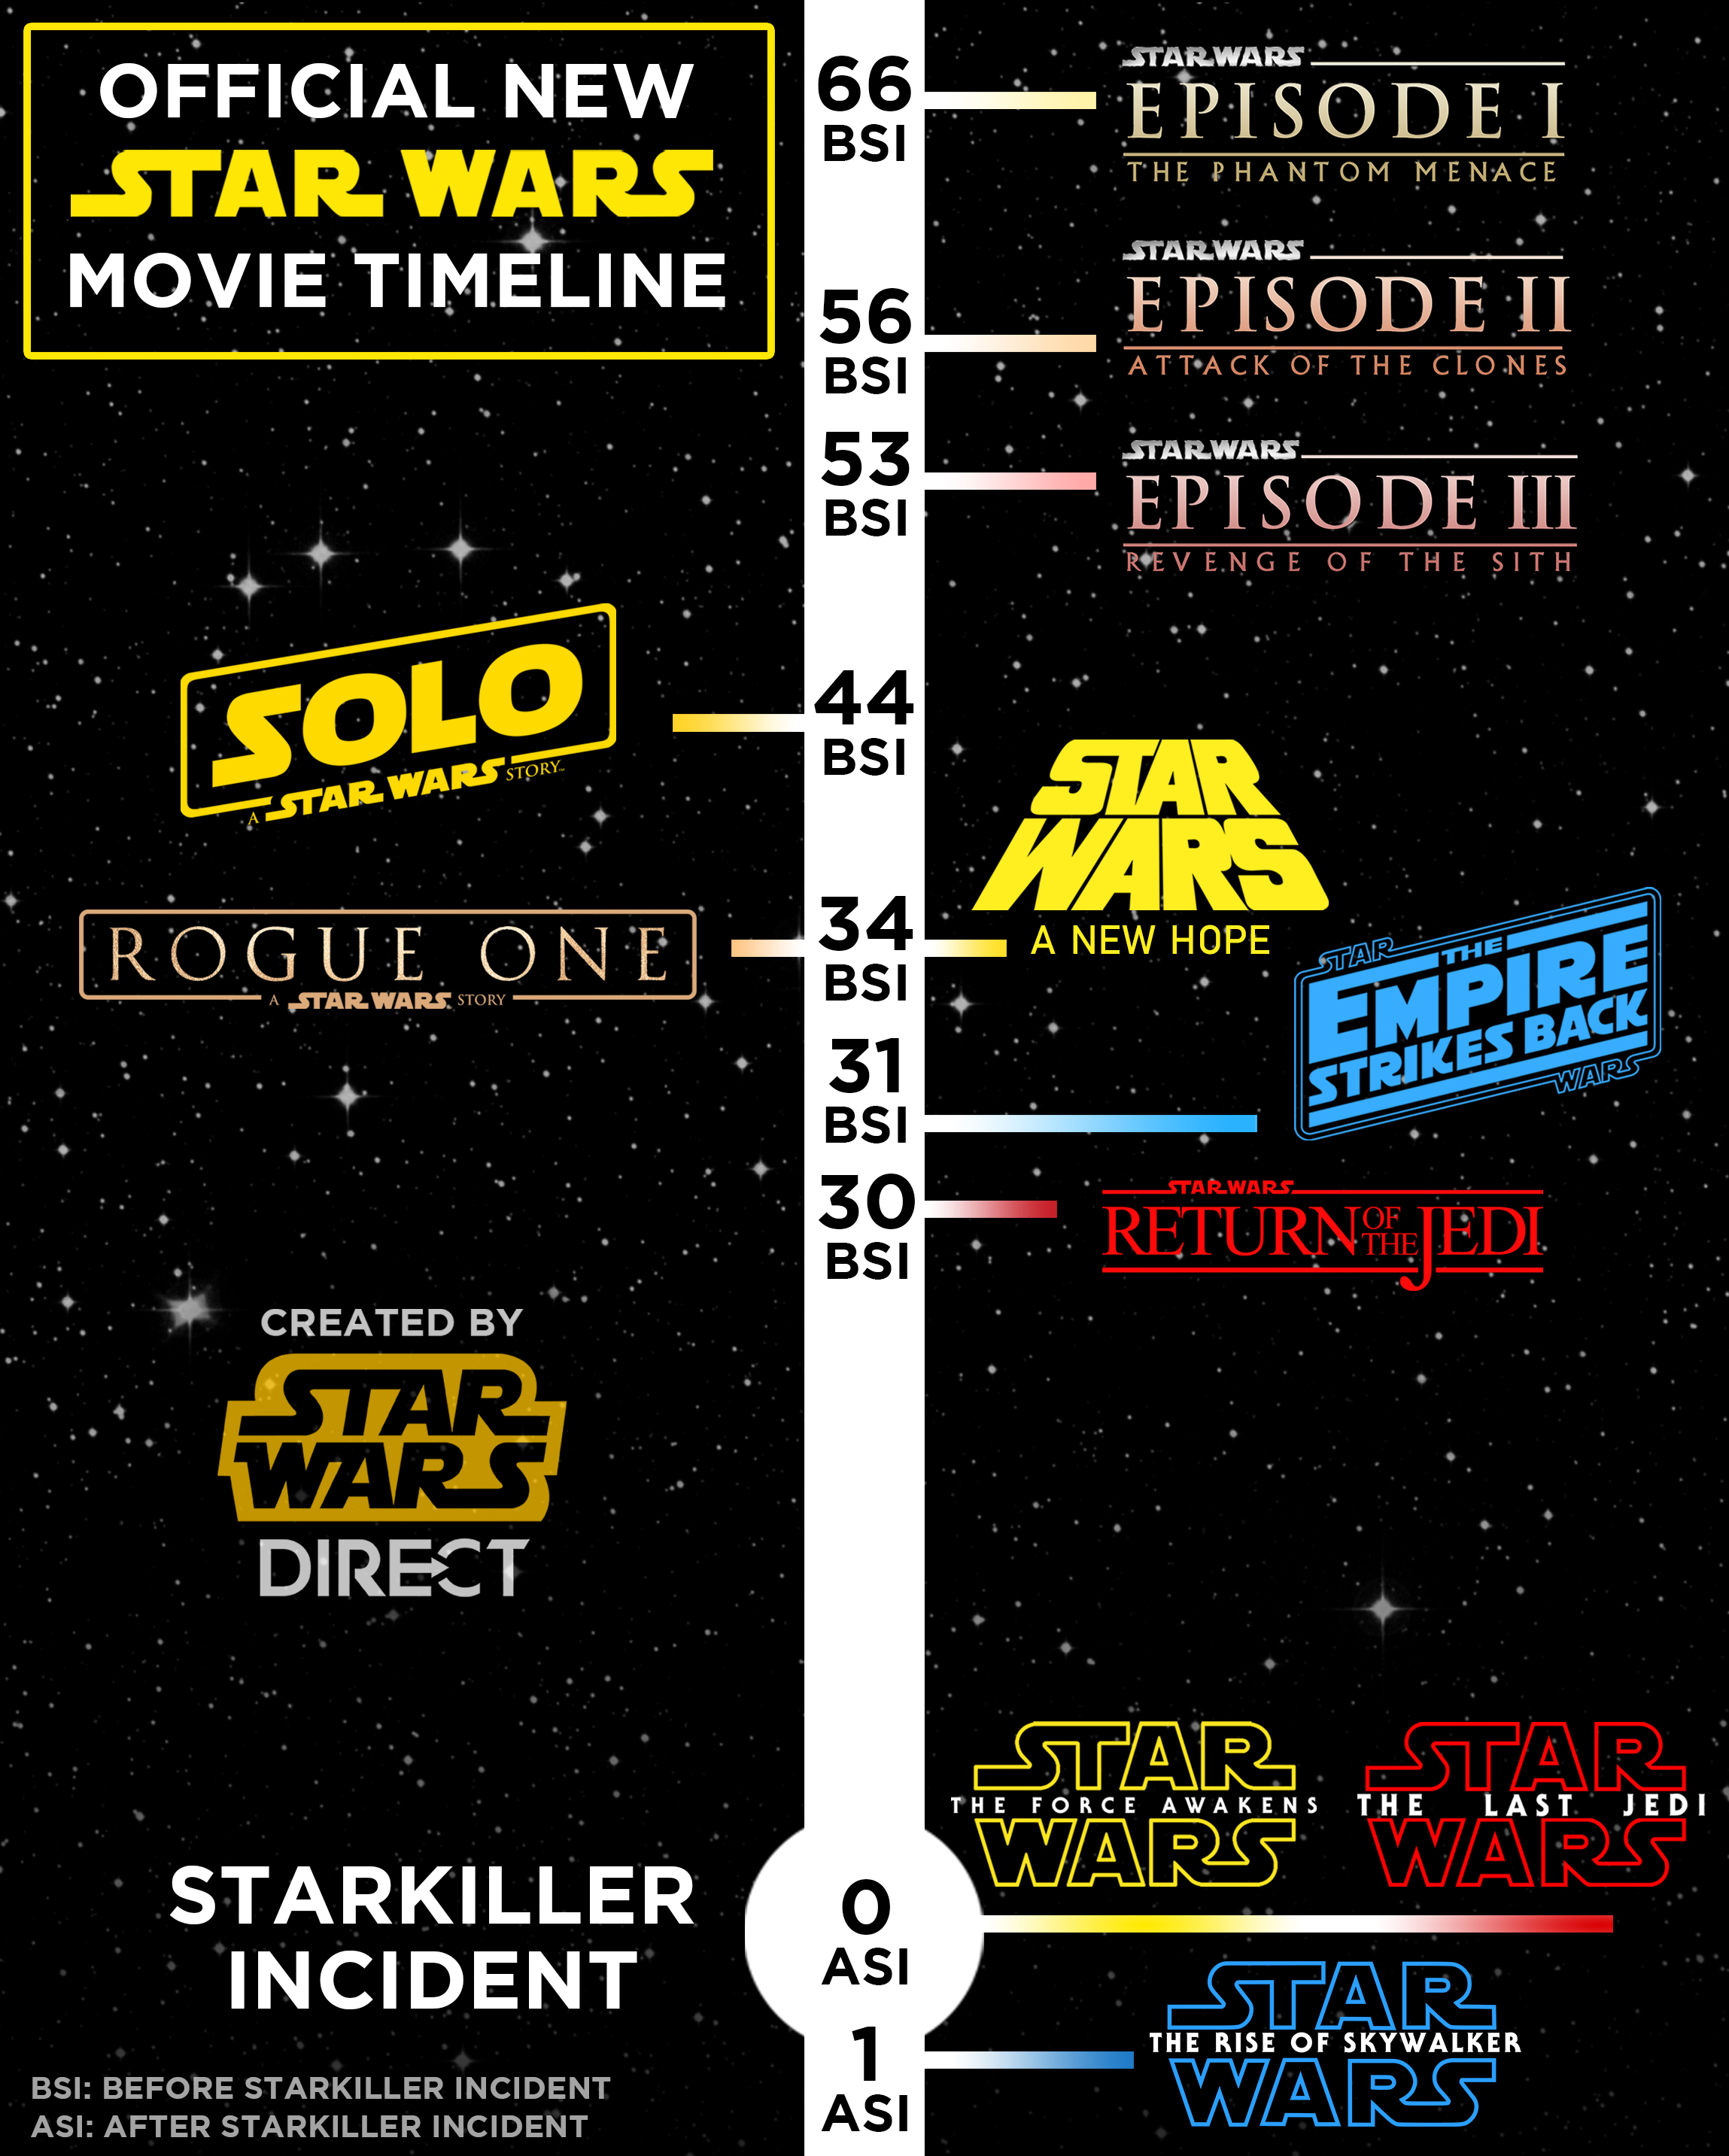 Corrupto Aplicable fósil Star Wars - The Direct on Twitter: "This timeline shows the  newly-designated official years of when the live-action #StarWars movies  are set: https://t.co/rnWjQQvVVp https://t.co/krZFqM9Uno" / Twitter